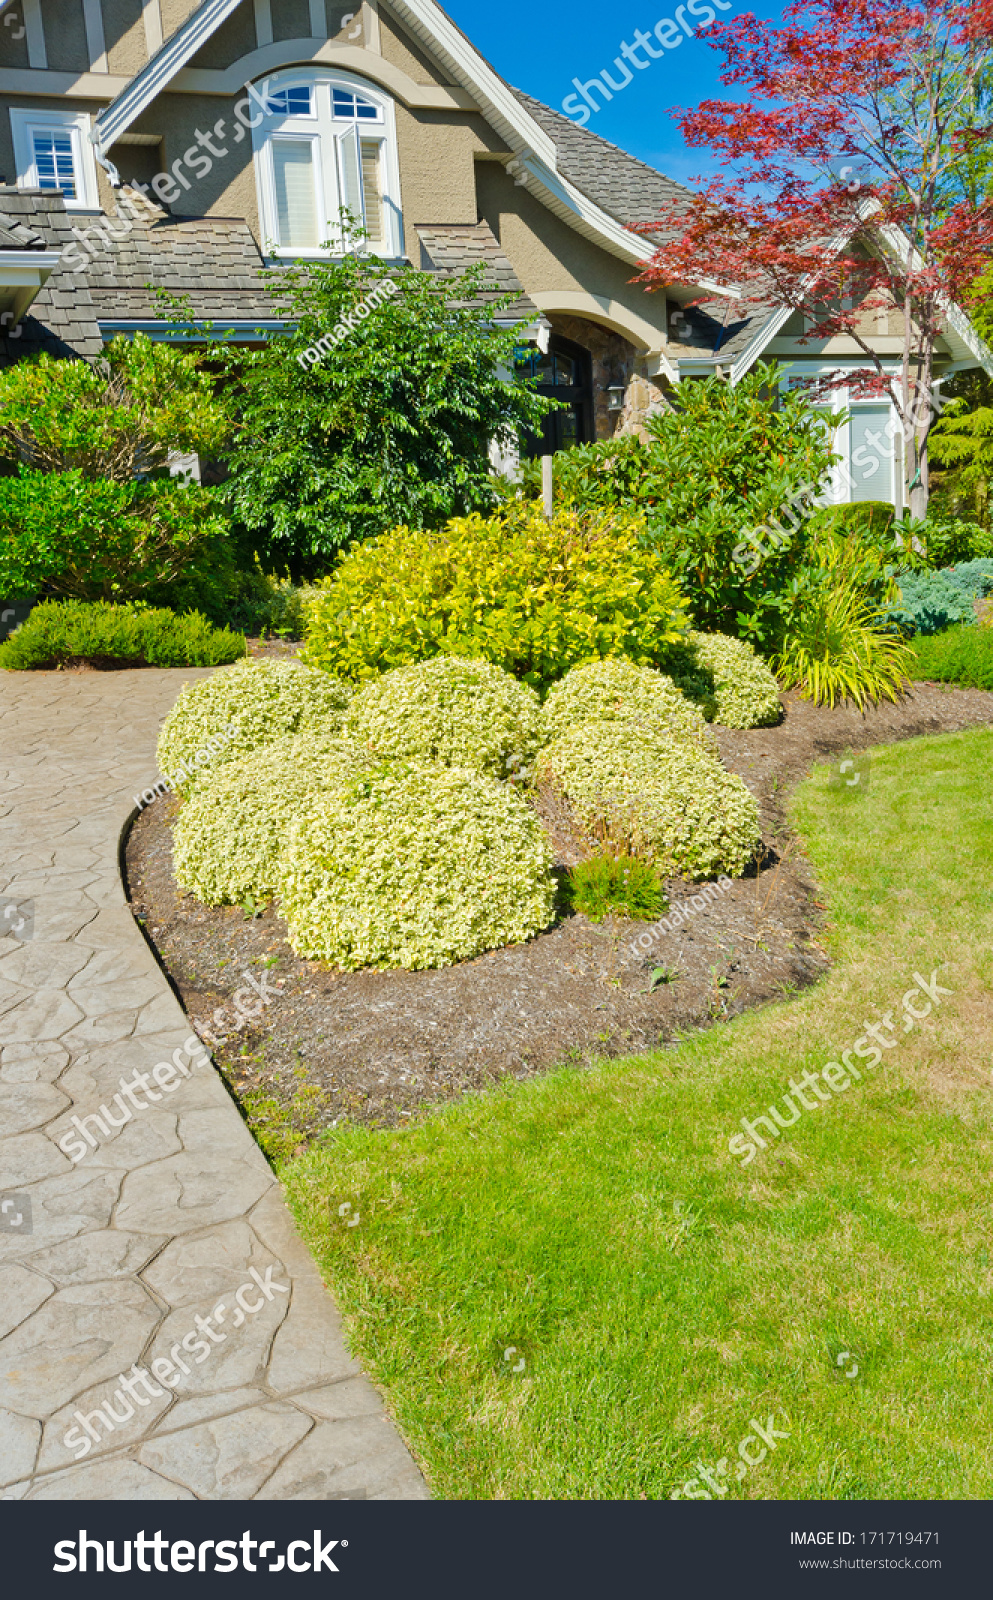 Nicely Trimmed Bushes Front House Front Stock Photo (Edit Now) 171719471.